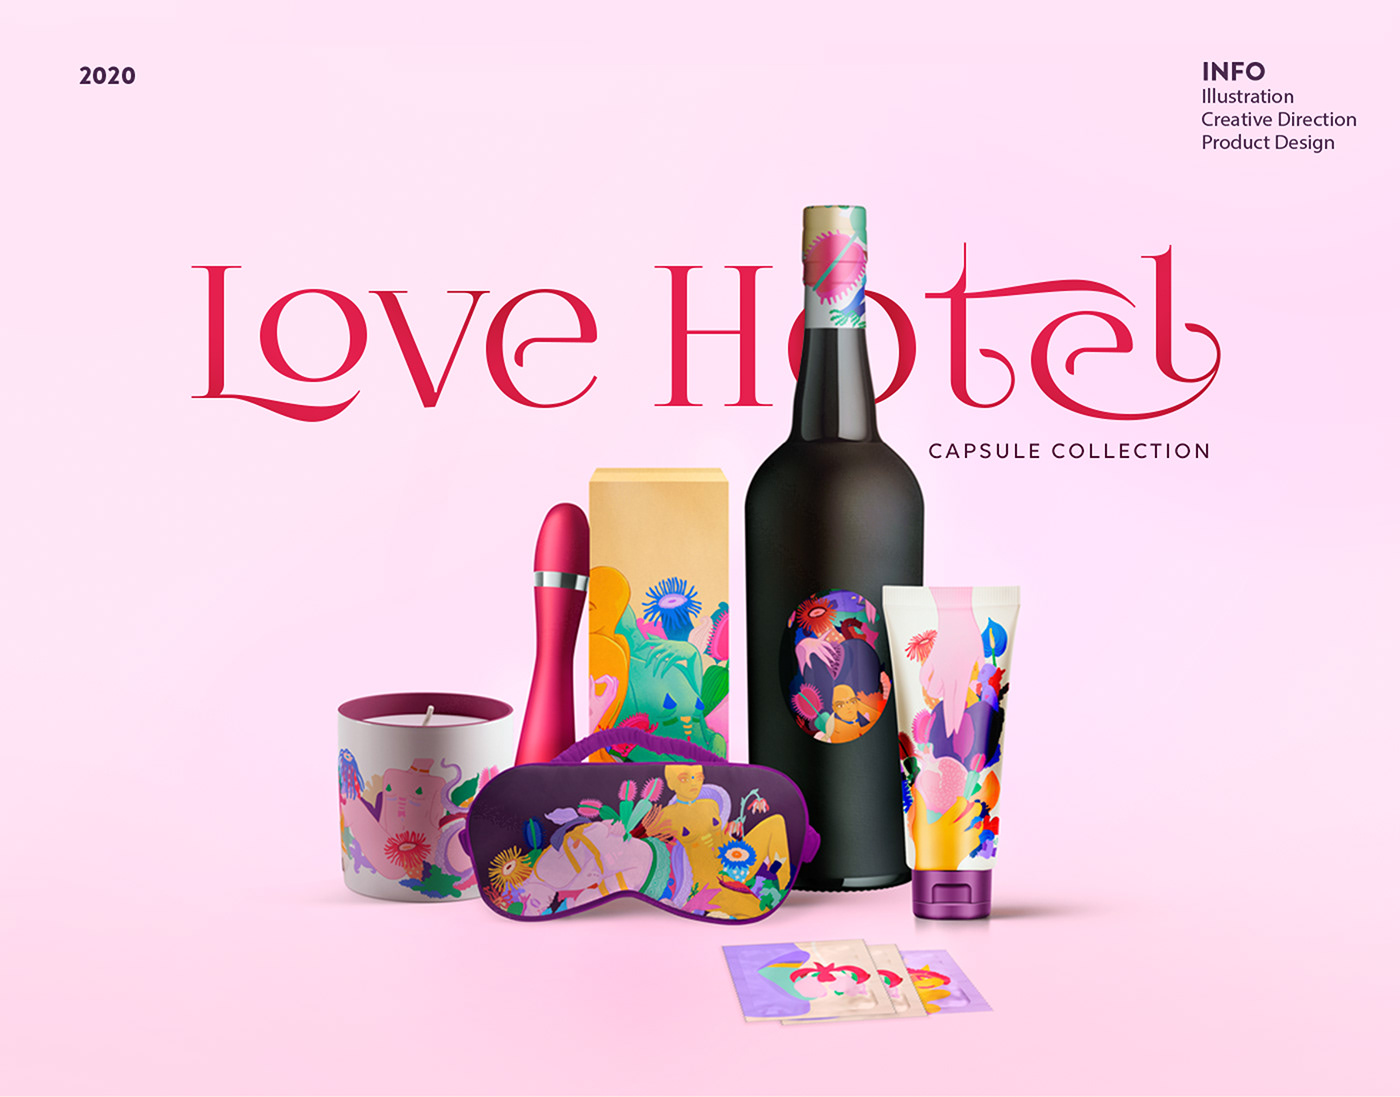 capsule collection colorful Erotism hotel ILLUSTRATION  Love wine